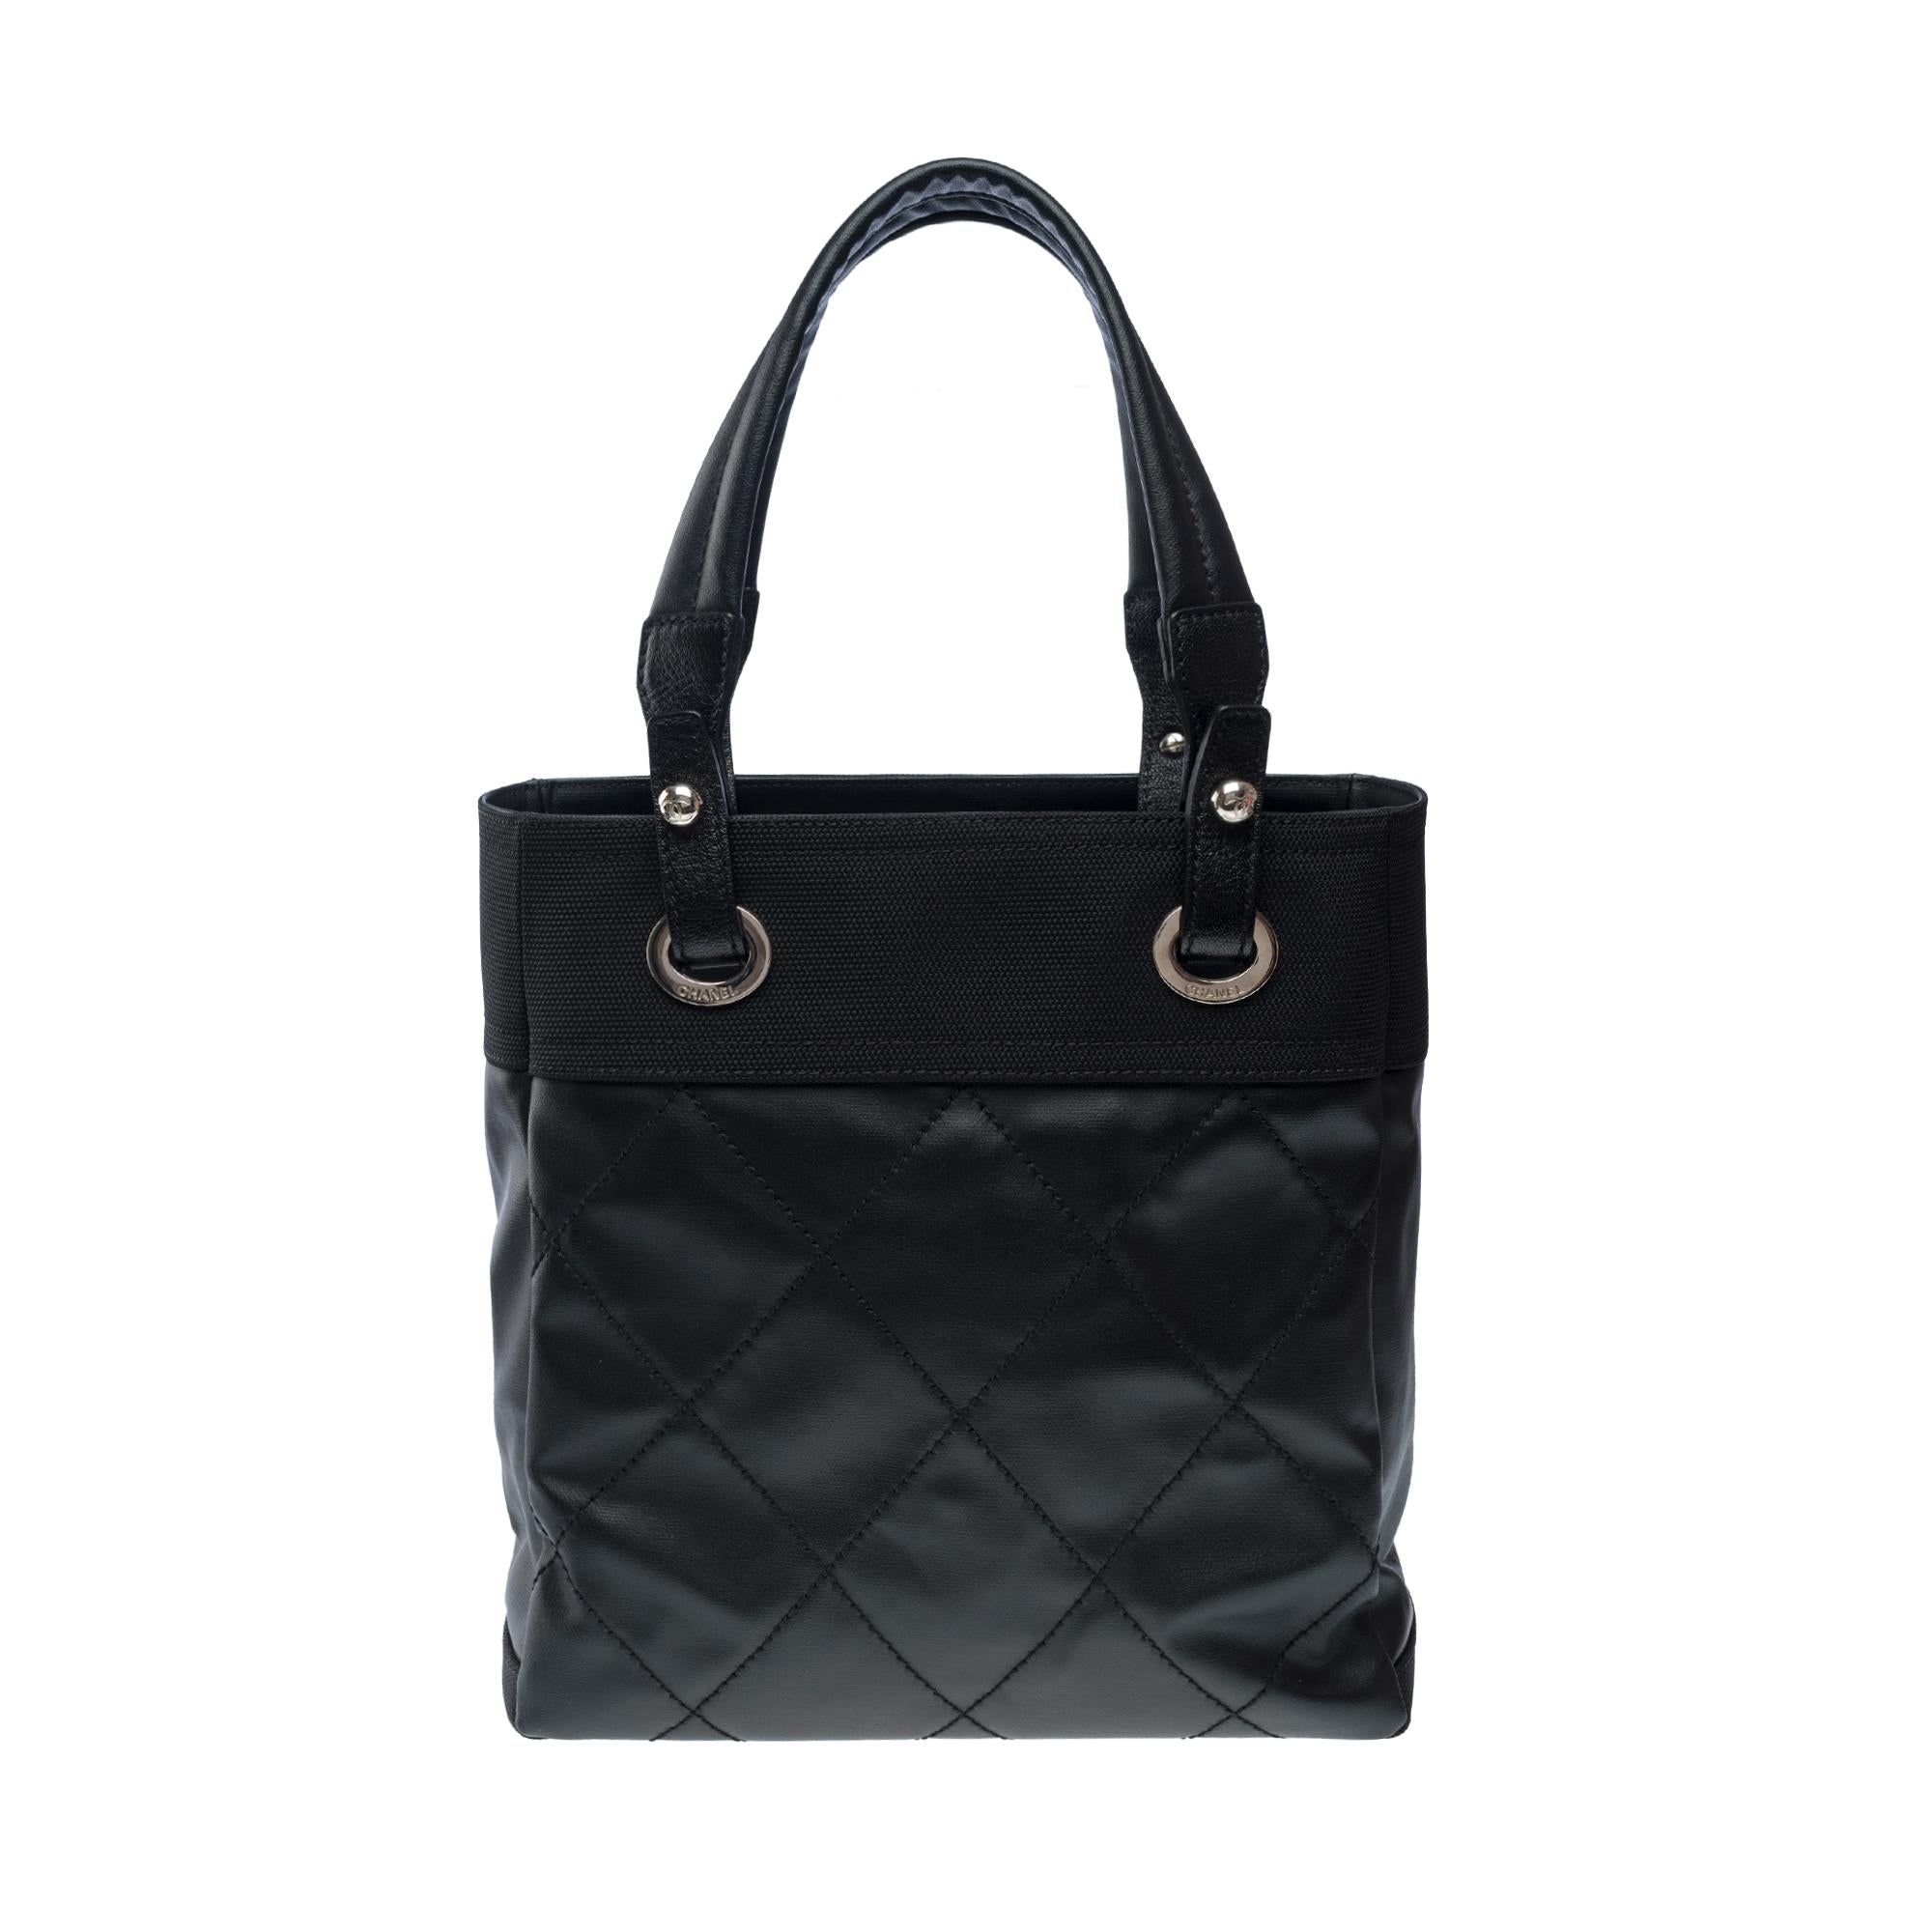  Chanel Paris-Biarritz Tote bag in black coated canvas , SHW For Sale 1